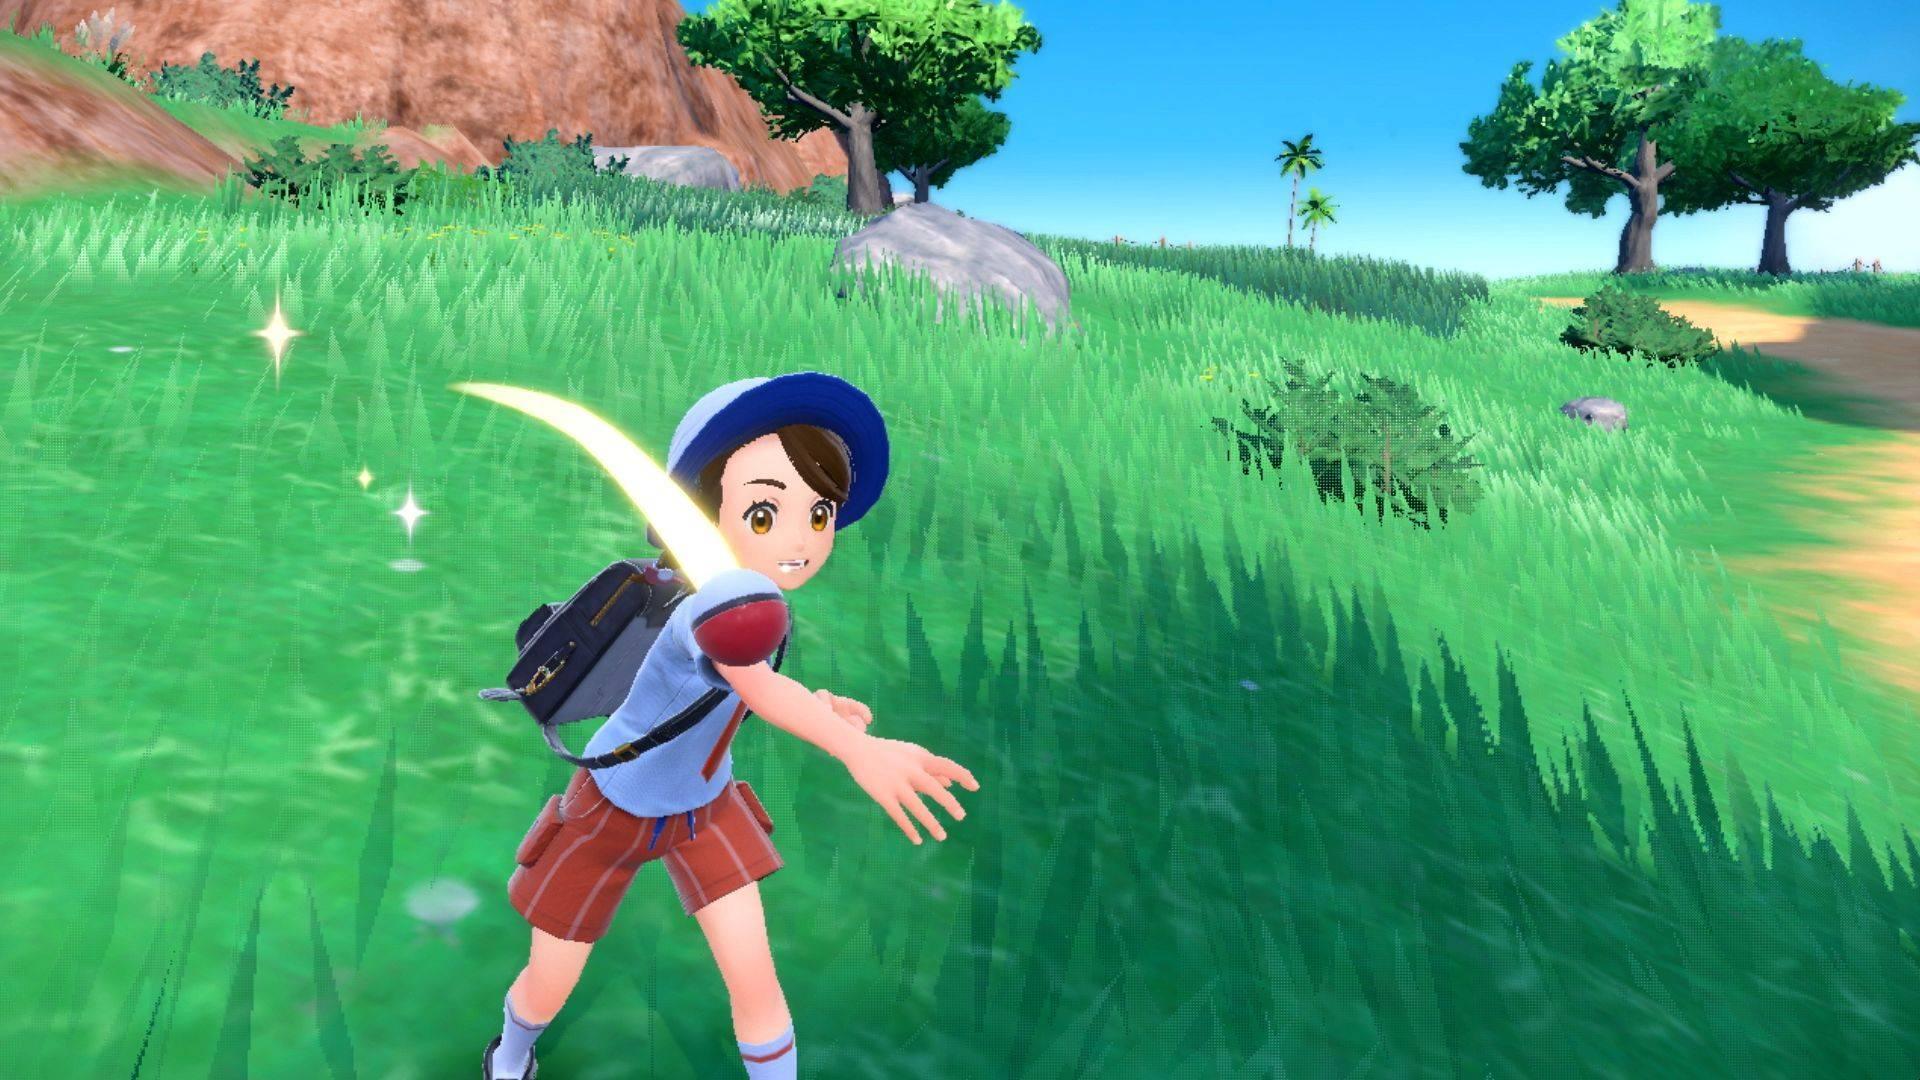 Pokémon Scarlet and Violet deliver a fully open world beset by